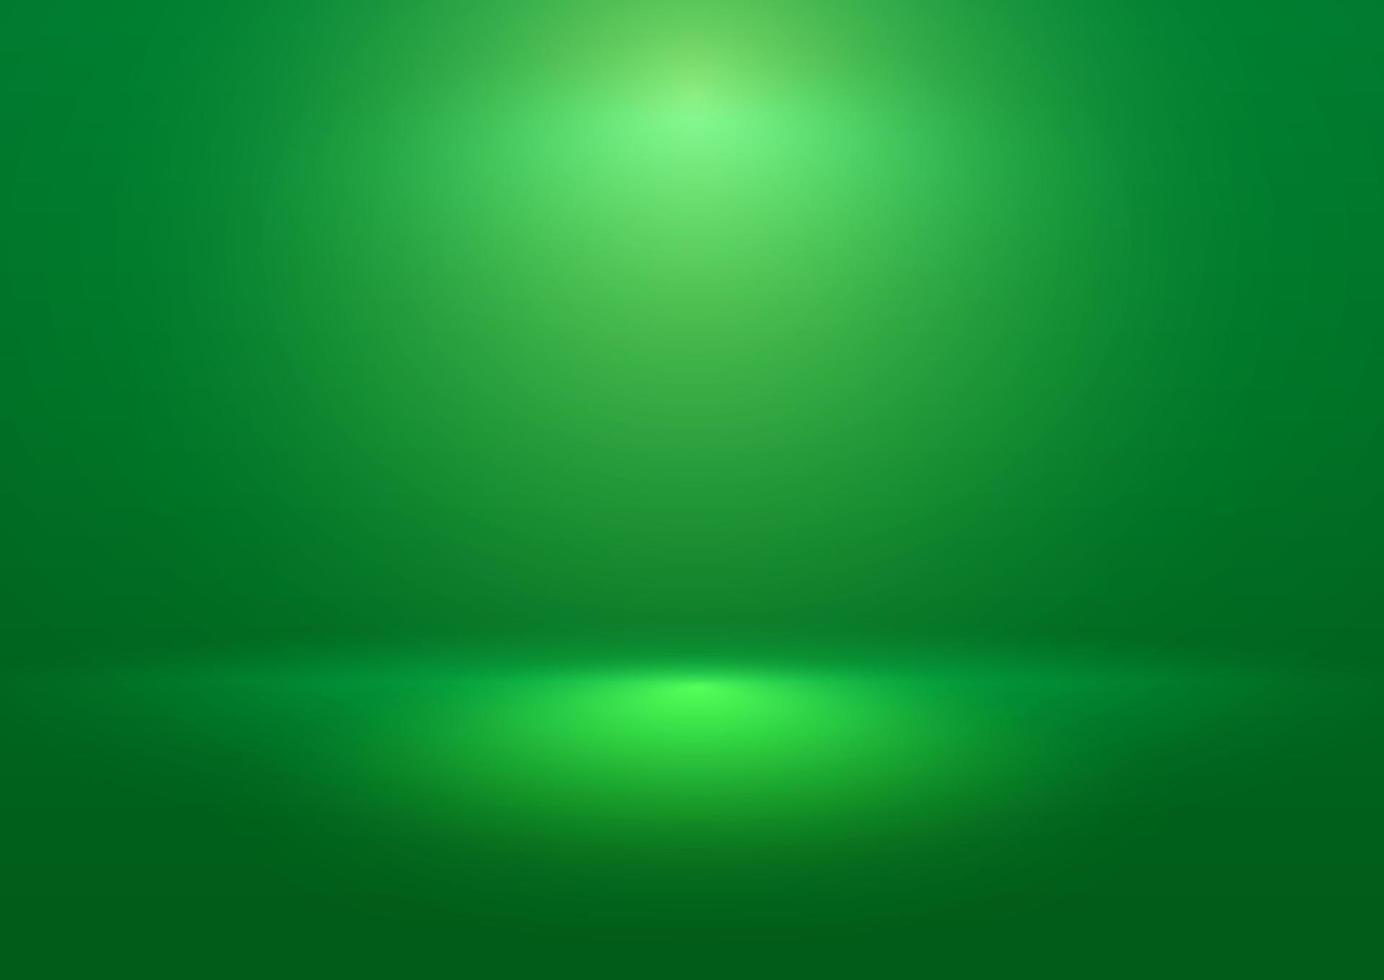 Abstract Frash light shining on the green with gradient blur. Picture can be used as an illustration, product advertising background image, template, backdrop and the design of the designer. vector